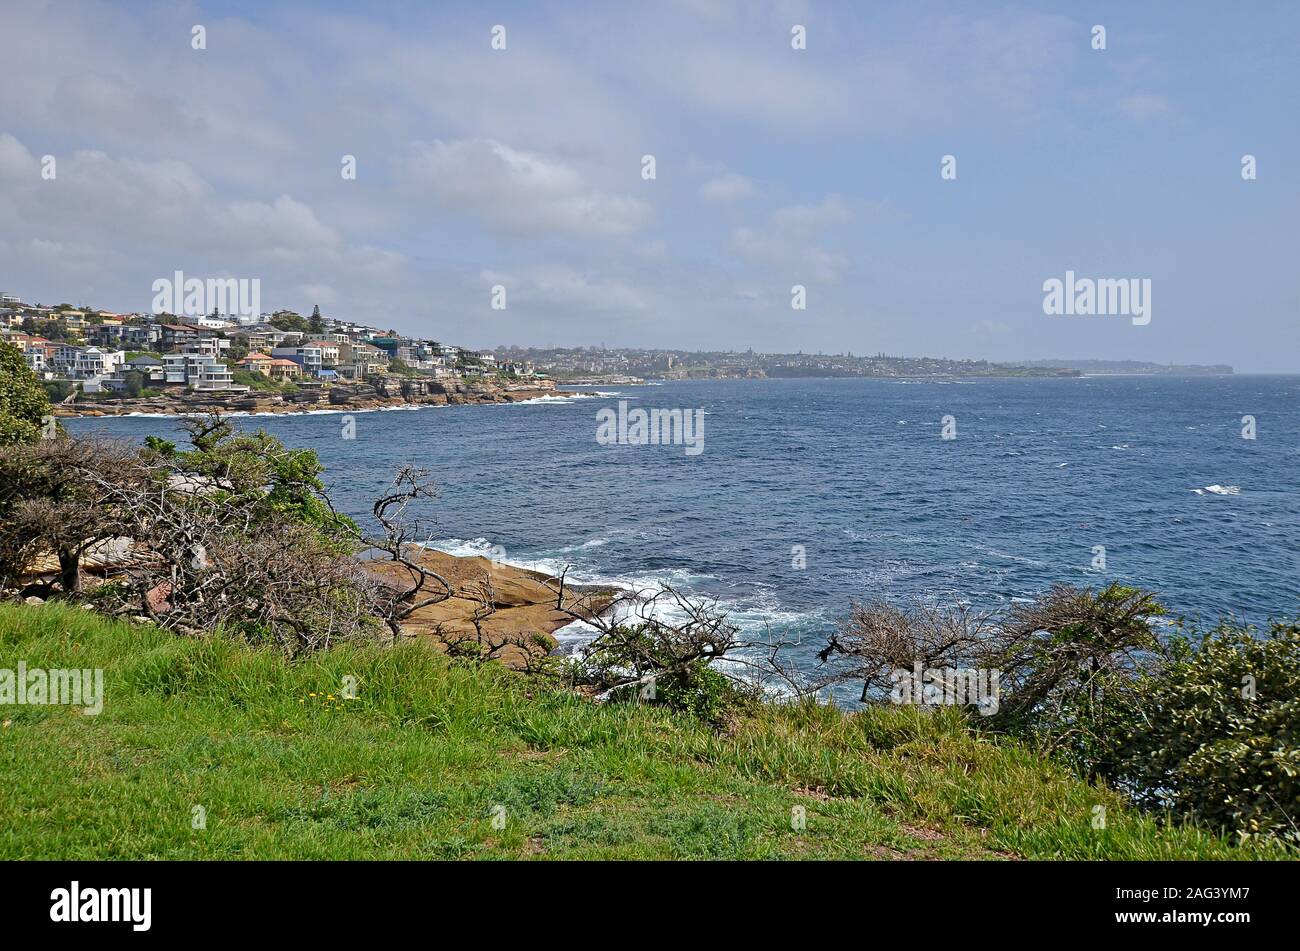 One of the most beautiful coastal walks listed in Sydney starting from iconic Bondi beach and leading to Maroubra beach, Australia Stock Photo